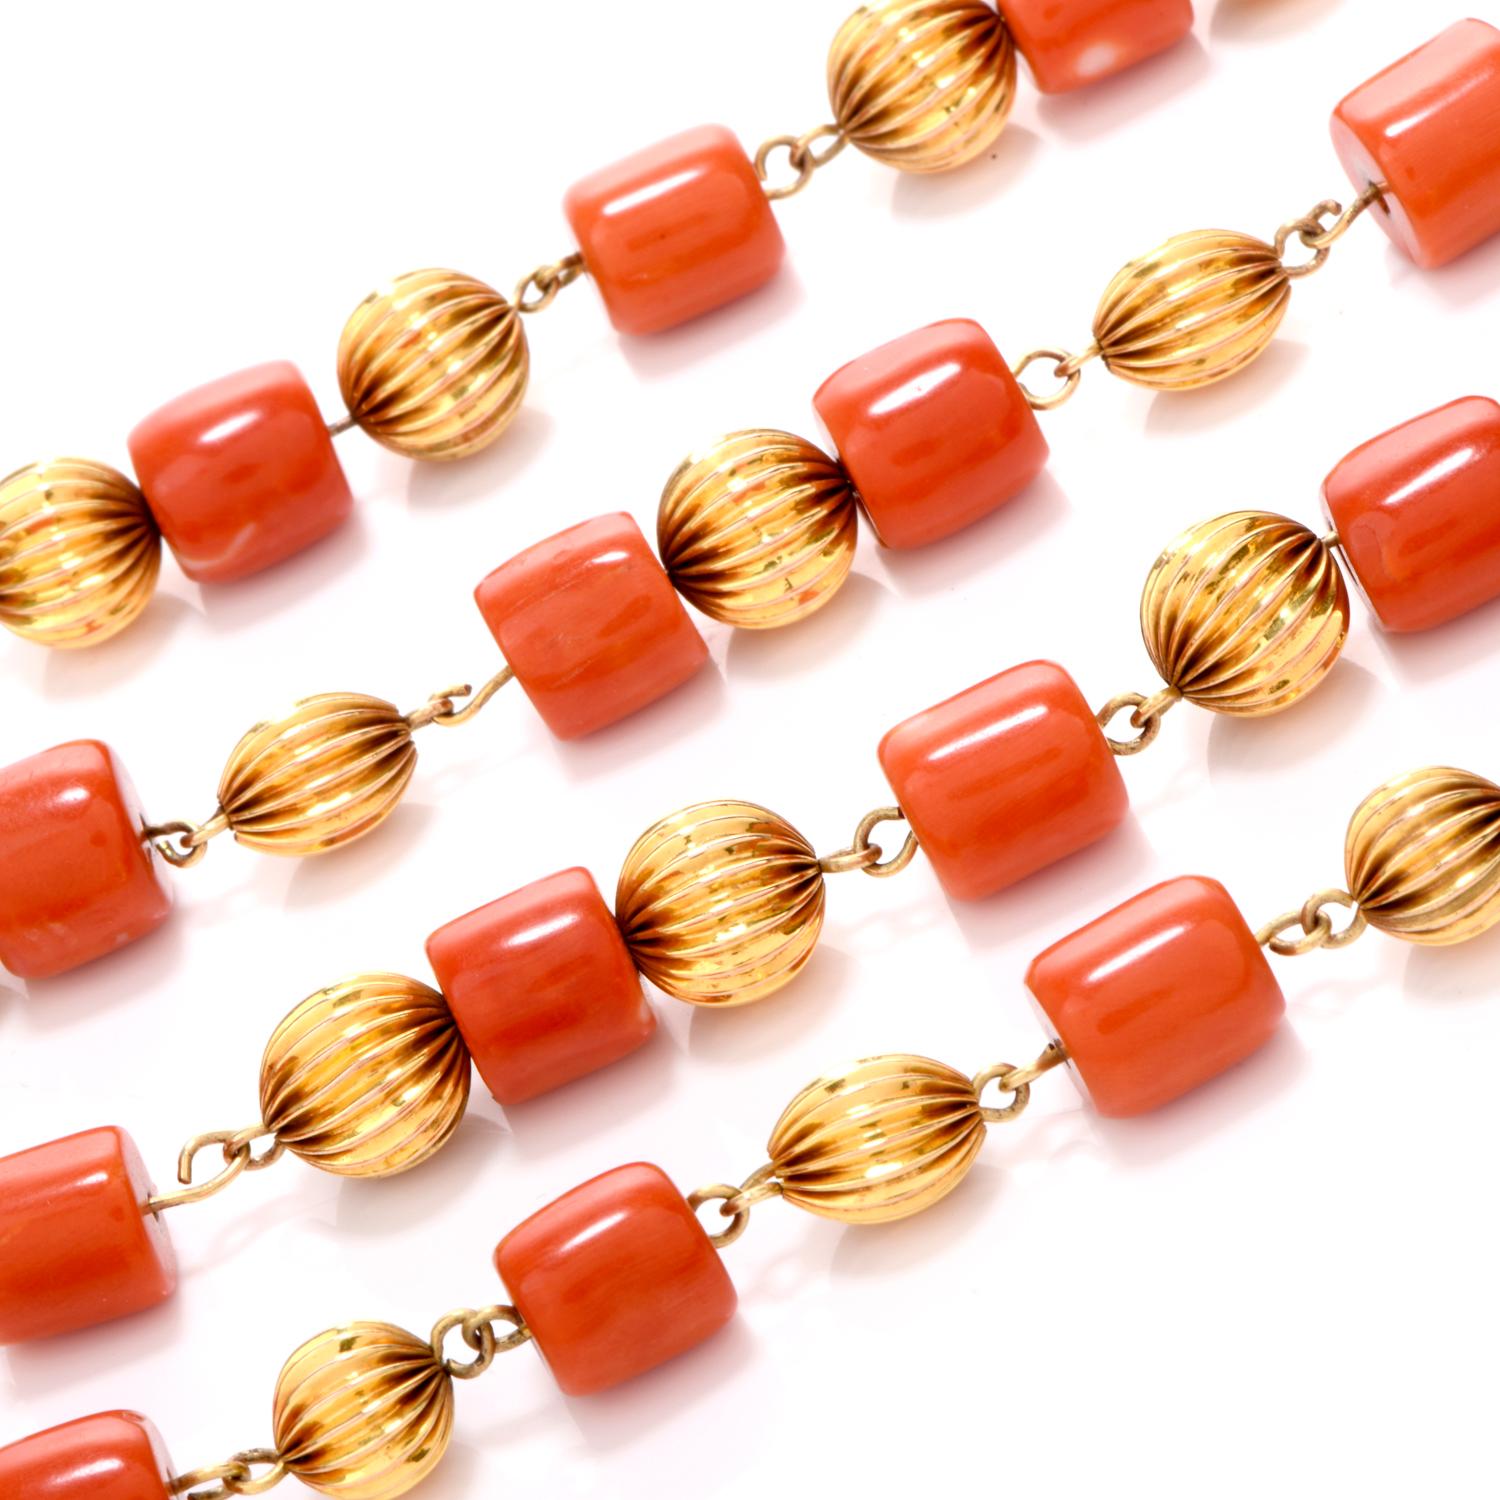 coral beads necklace designs